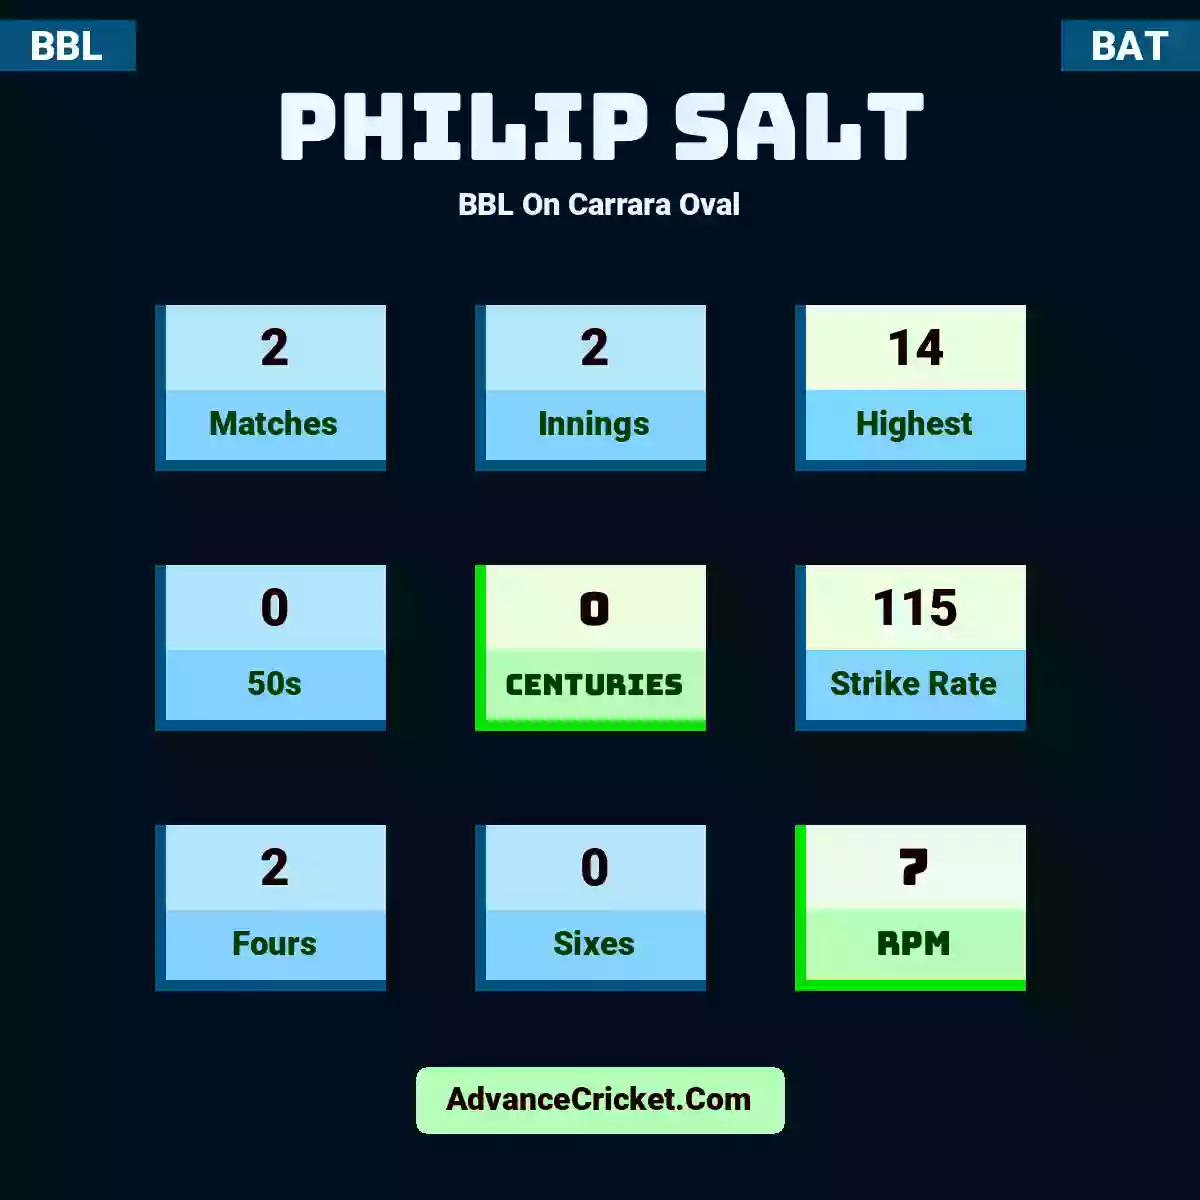 Philip Salt BBL  On Carrara Oval, Philip Salt played 2 matches, scored 14 runs as highest, 0 half-centuries, and 0 centuries, with a strike rate of 115. P.Salt hit 2 fours and 0 sixes, with an RPM of 7.